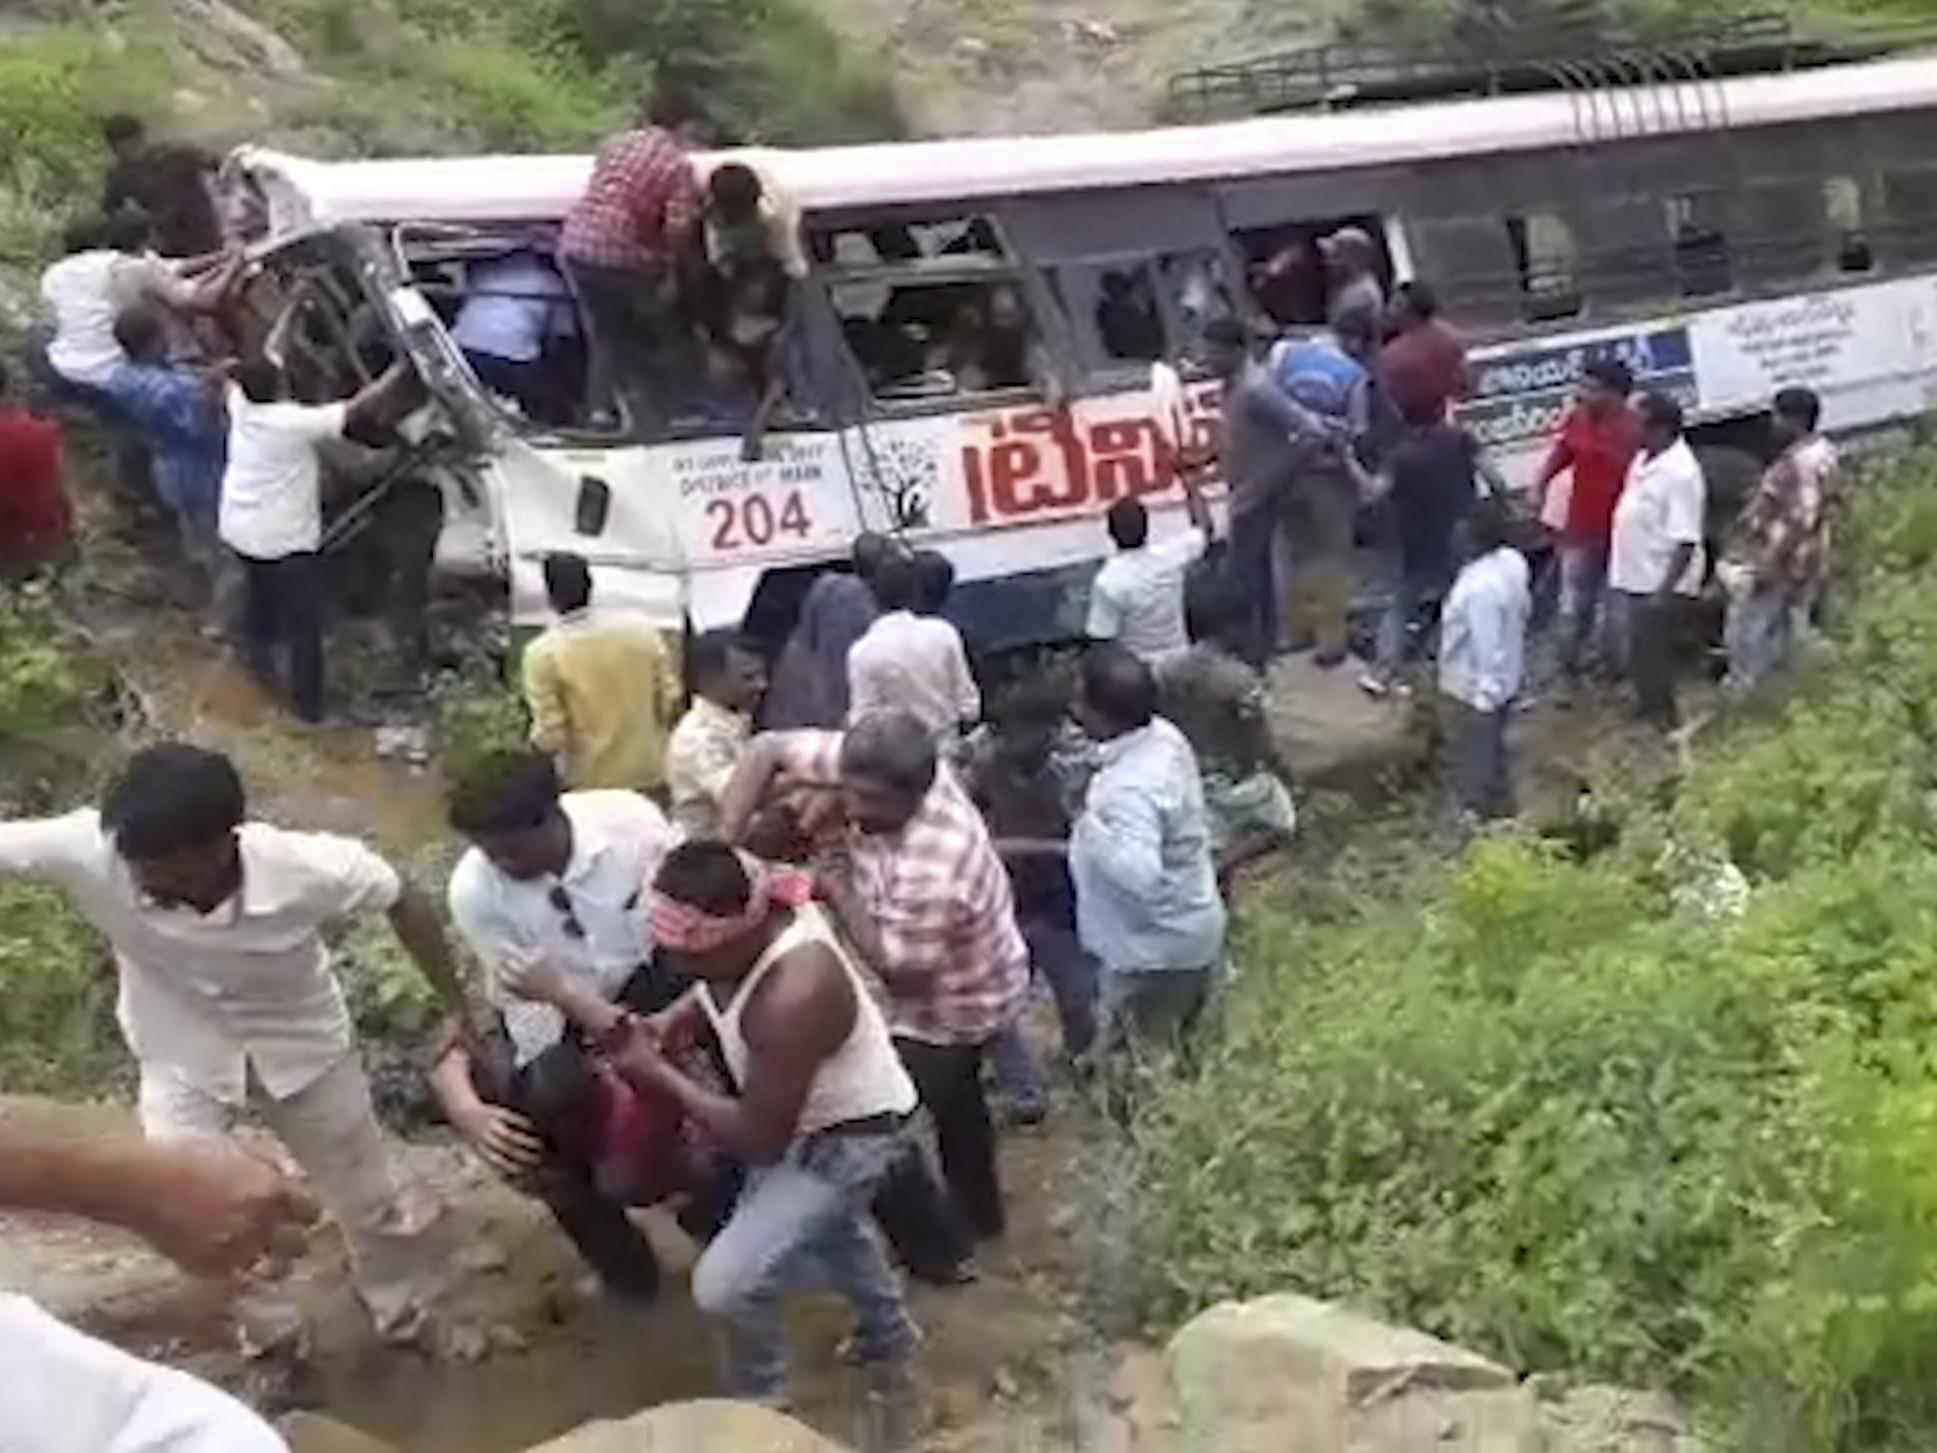 Deadly bus accidents are common in India and more than 100,000 people die every year on the country's roads